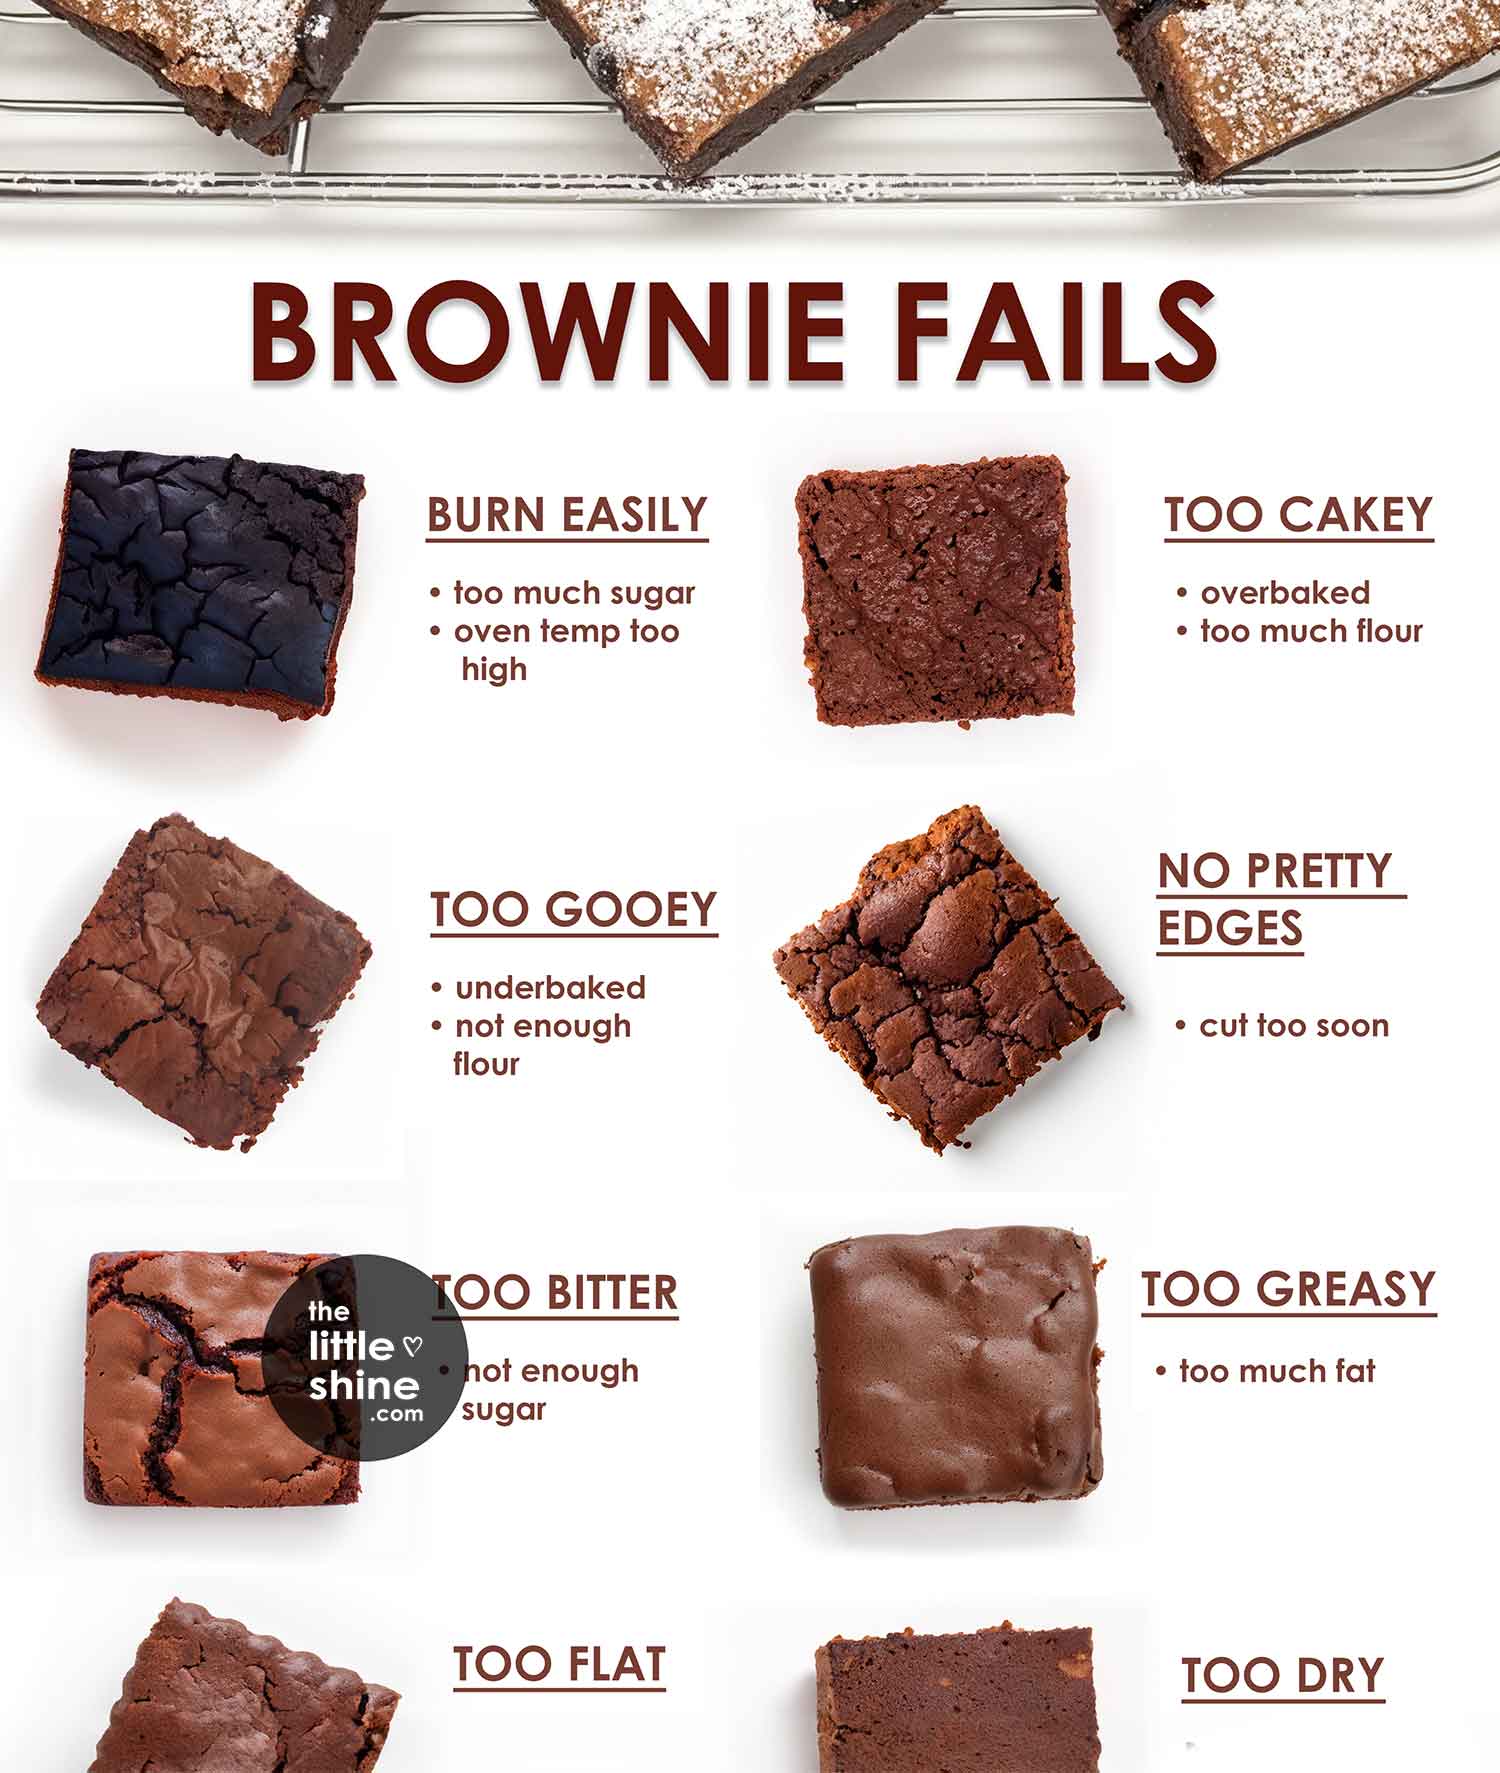 BROWNIE FAILS - What's Ruining Your Brownies?